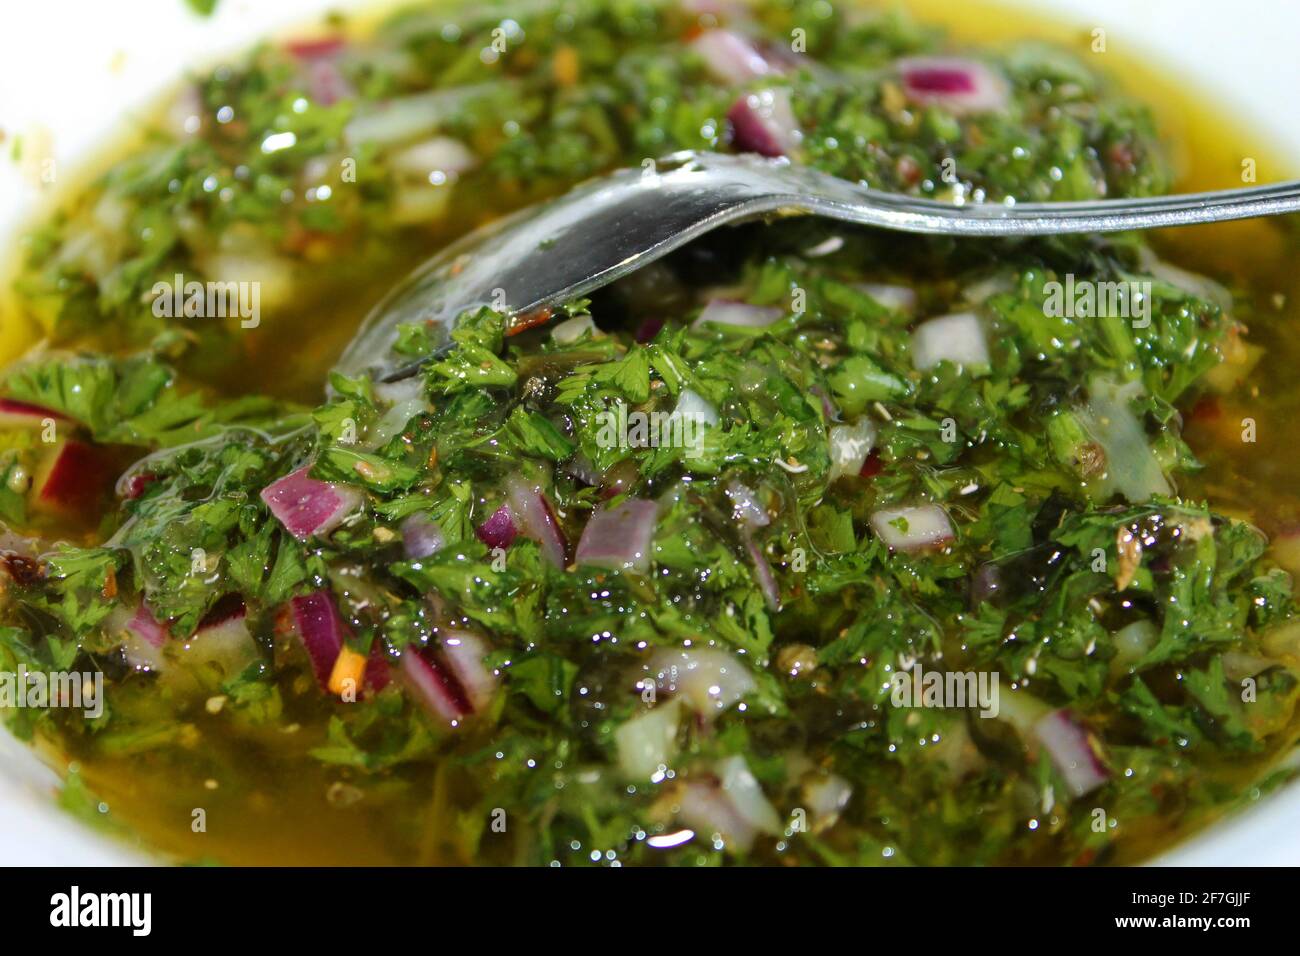 Close-up of a dish of homemade chimichurri sauce, with spoon. Stock Photo